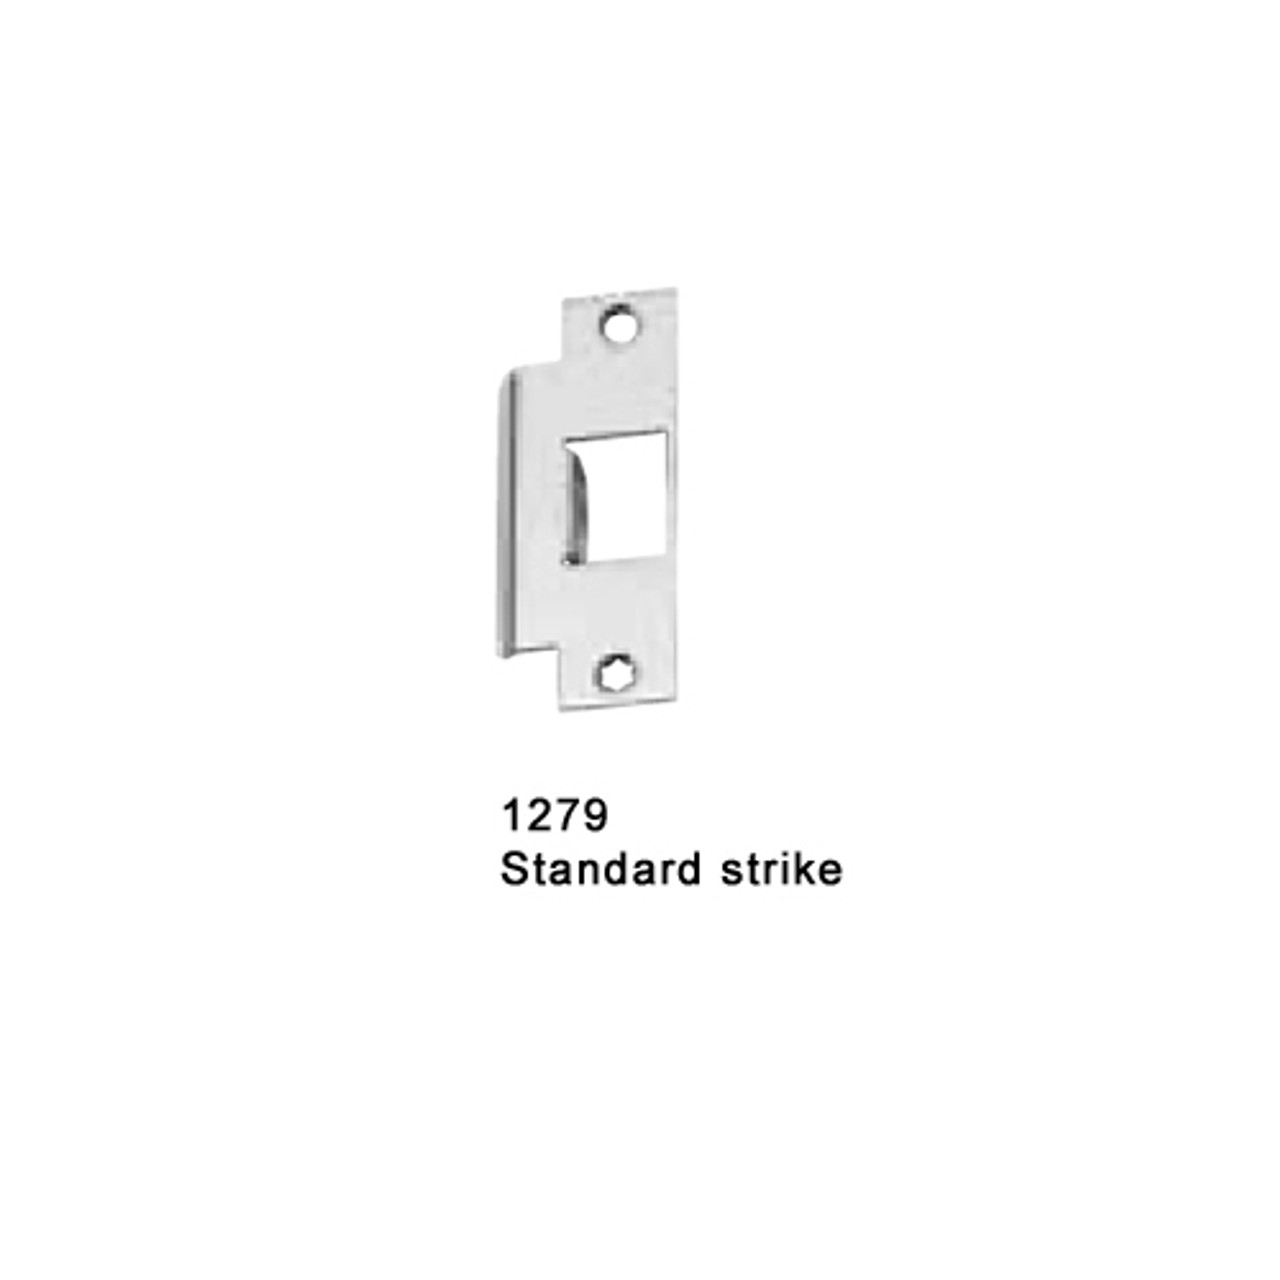 F-25-M-L-DT-Dane-US28-4-LHR Falcon 25 Series Fire Rated Mortise Lock Devices 510L-DT Dane Lever Trim with Dummy Trim in Anodized Aluminum